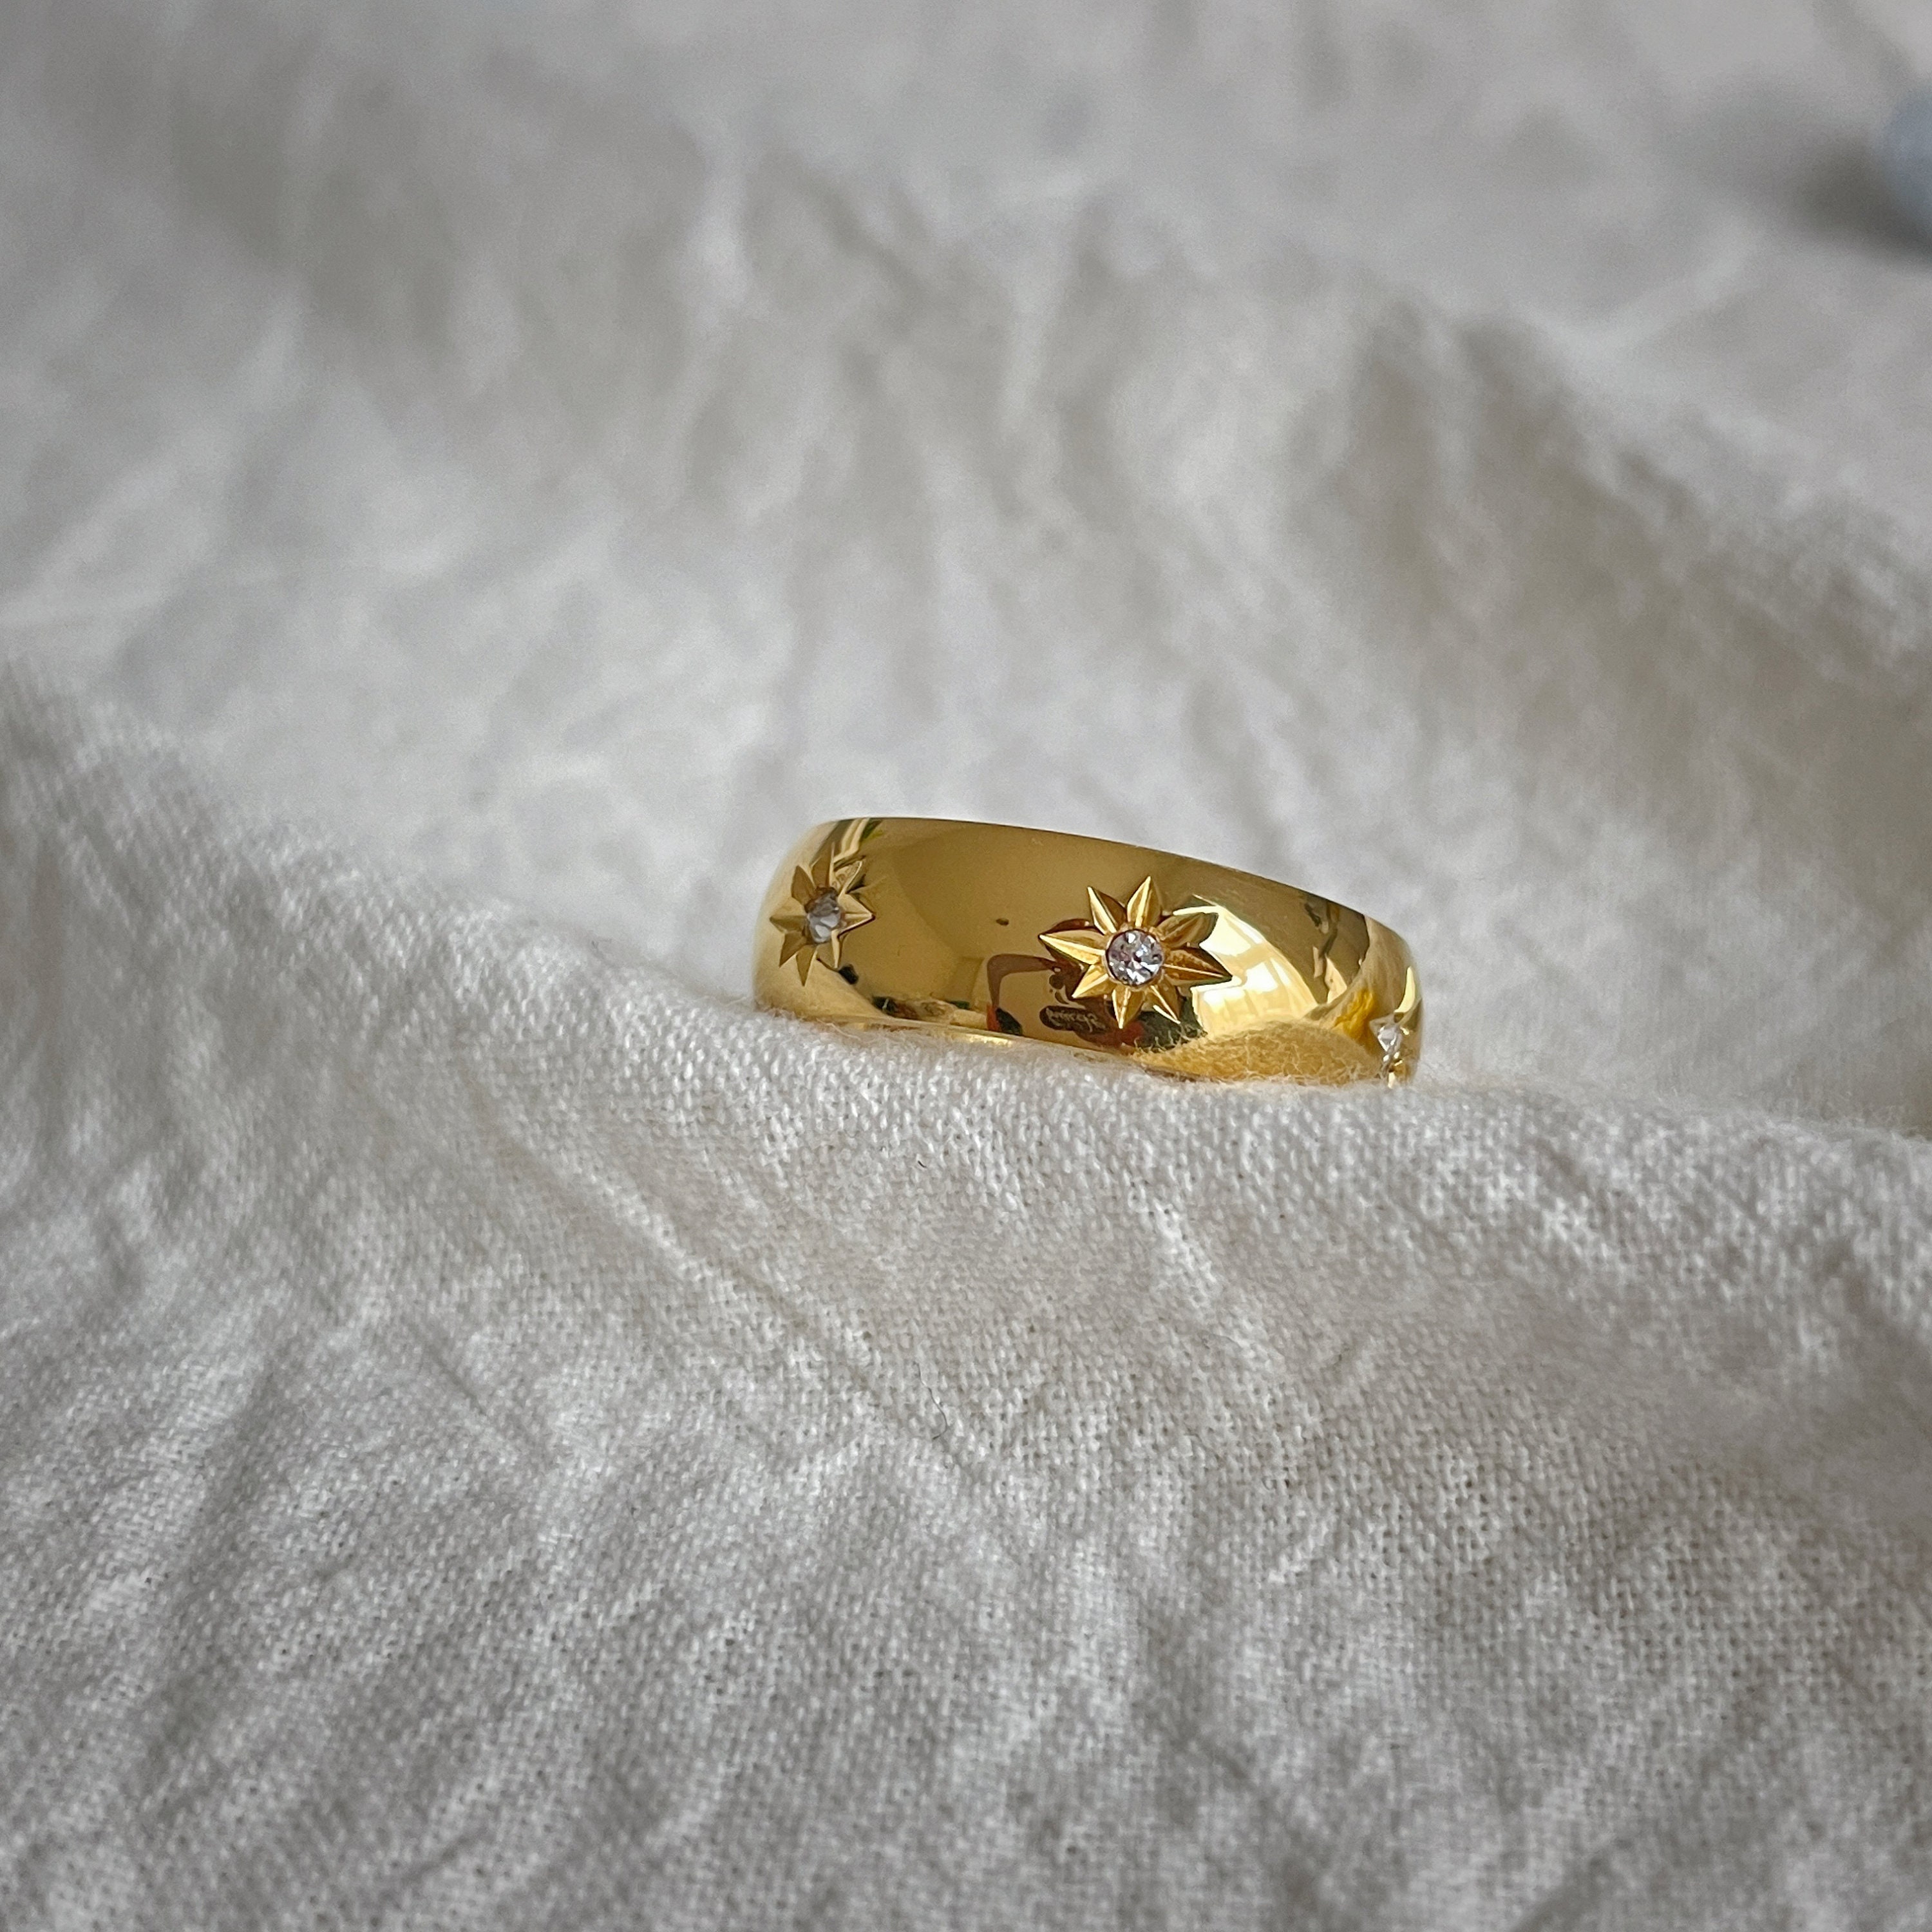 Rings Etsy Gold Pvd -